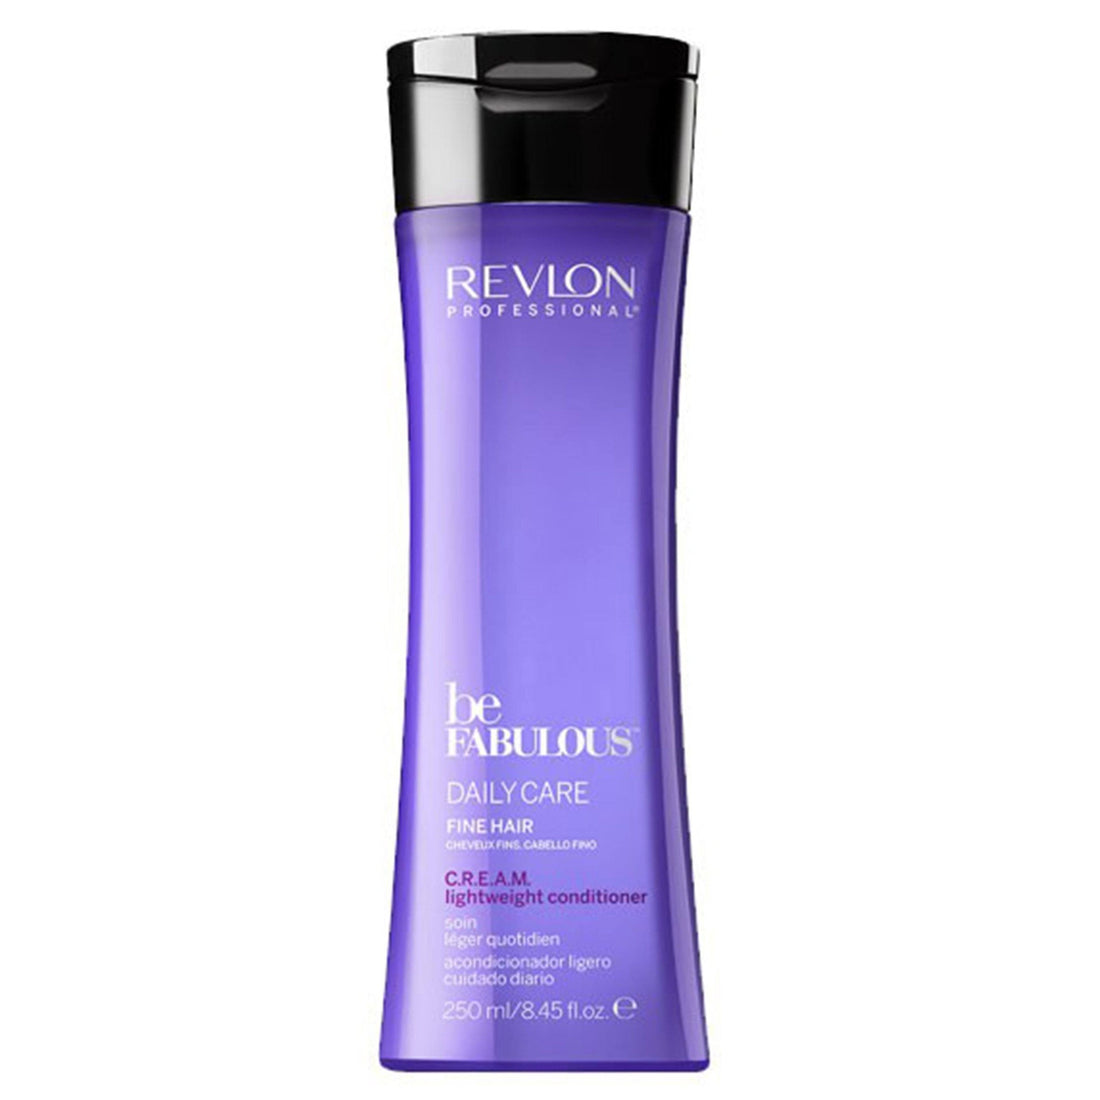 Buy Revlon Professional Be Fabulous Daily Care Lightweight Conditioner 250ml on HairMNL